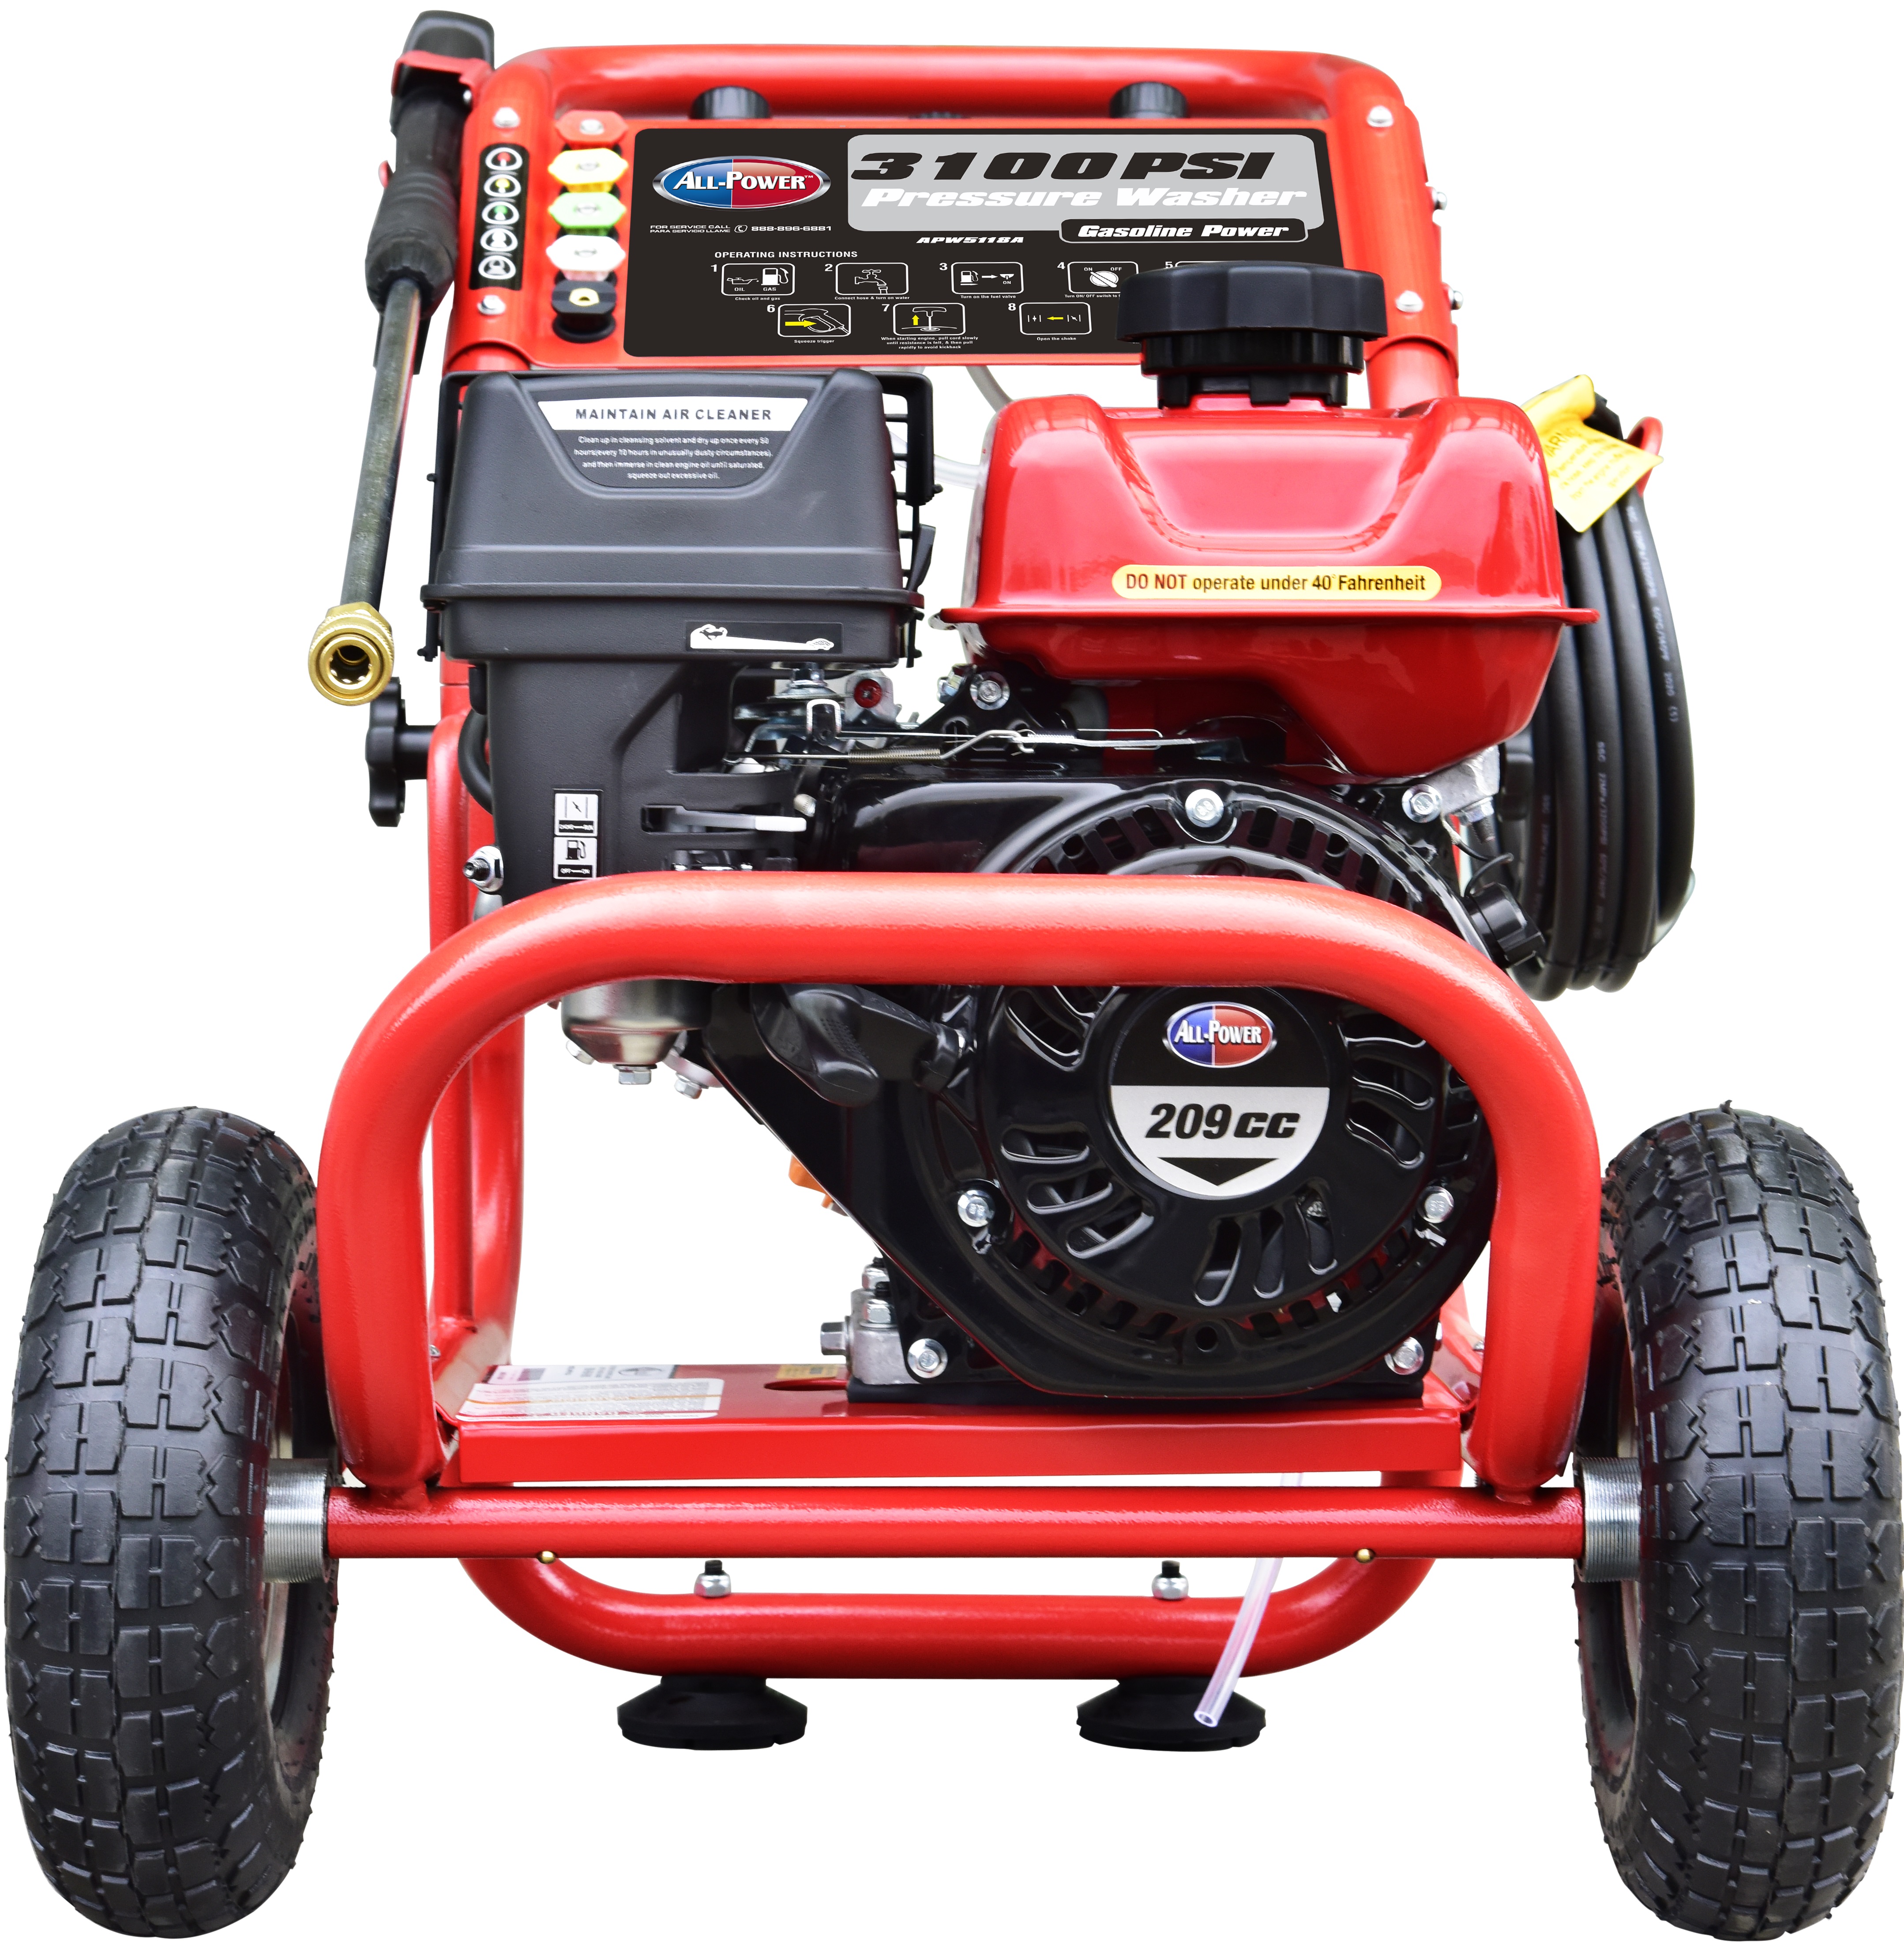 All Power America 3100 PSI, 2.6 GPM Gas Pressure Washer w/ 30 ft High Pressure Hose, C.A.R.B. Compliant, APW5118A - image 1 of 6